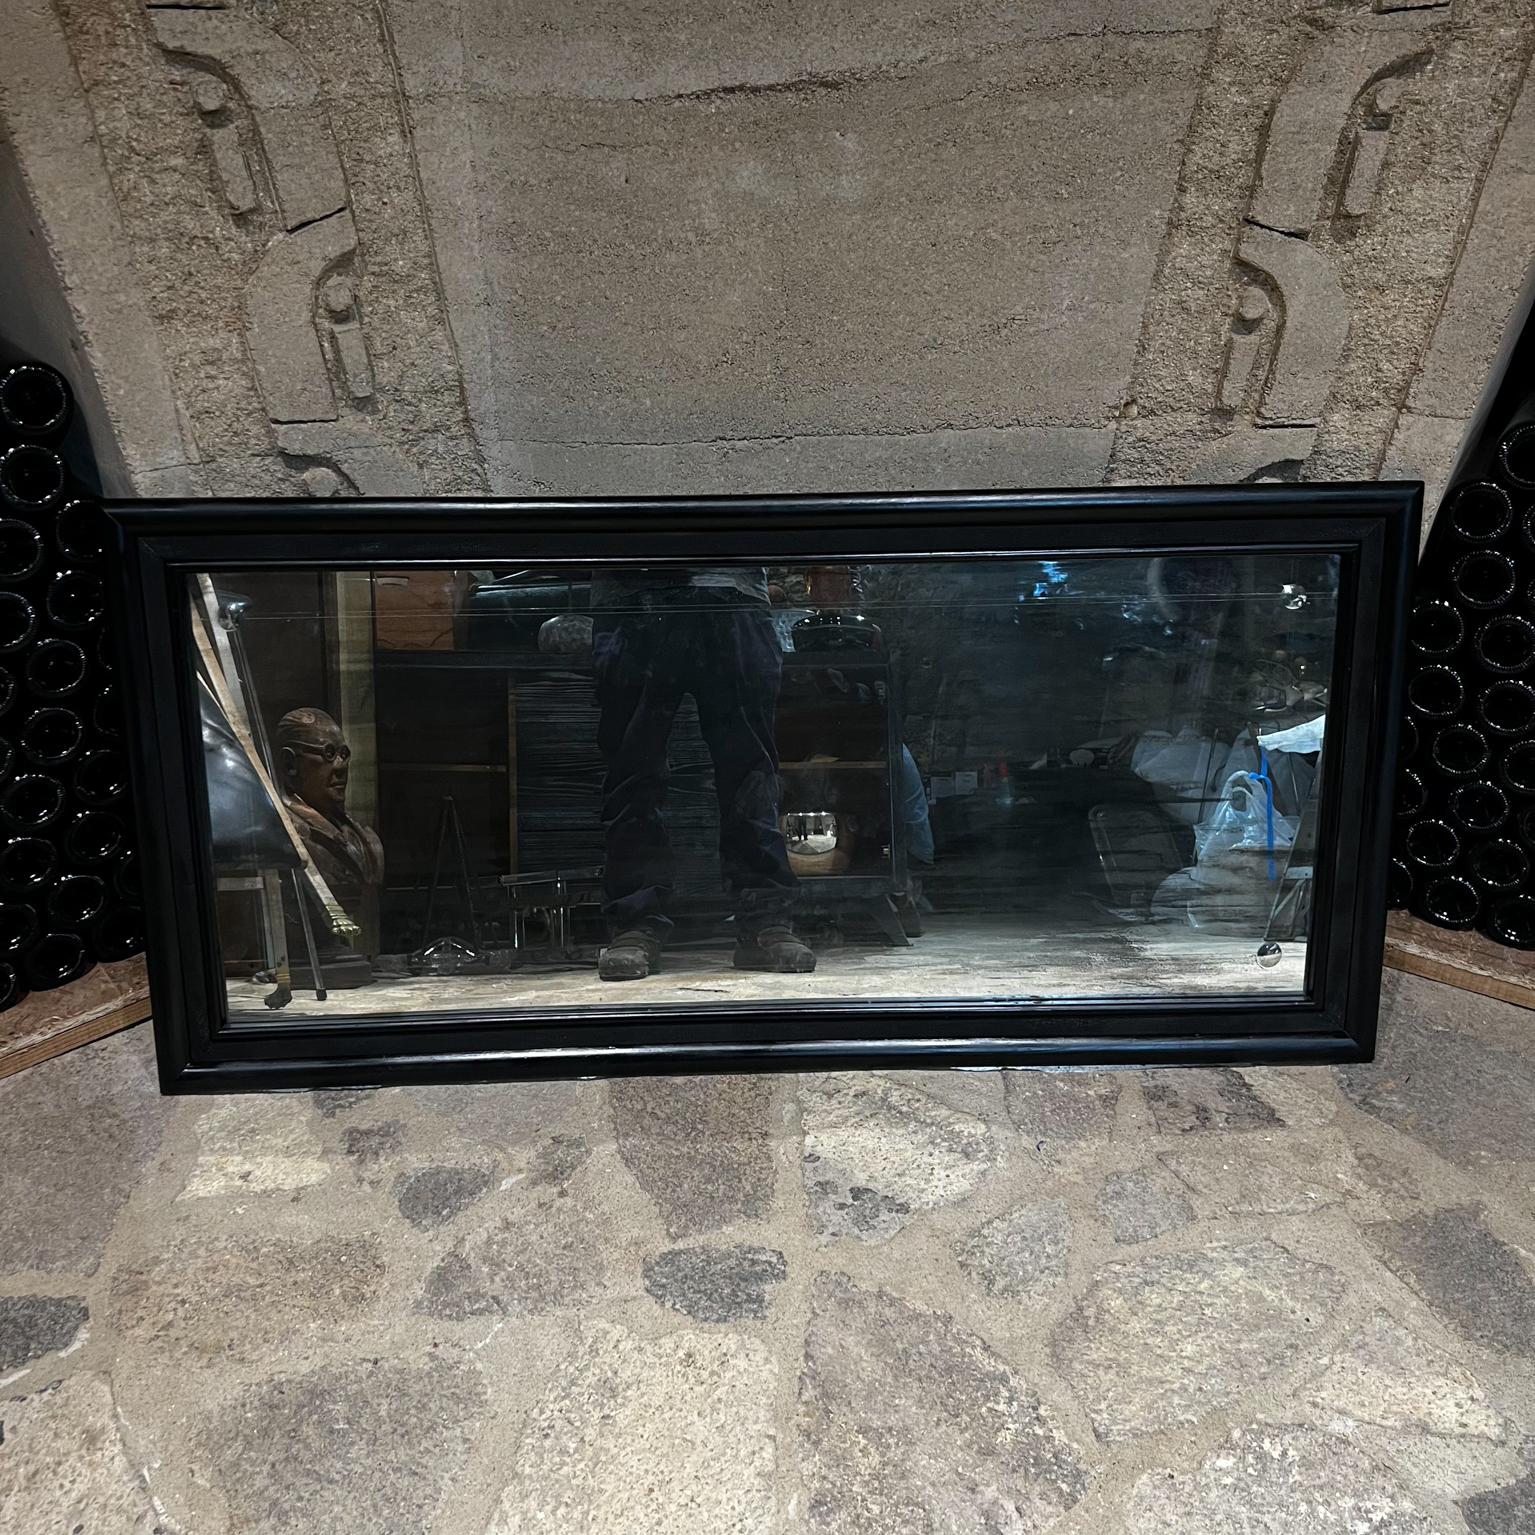 1950s Antique Wall Mirror Mexico City.
features satin black concave glass subtle lines 
fabulous vintage patina 
52.5 x 25 x 1.5 thick
Concave decorative patterns around the corners subtle lines horizontally and vertically.
No stamp from the